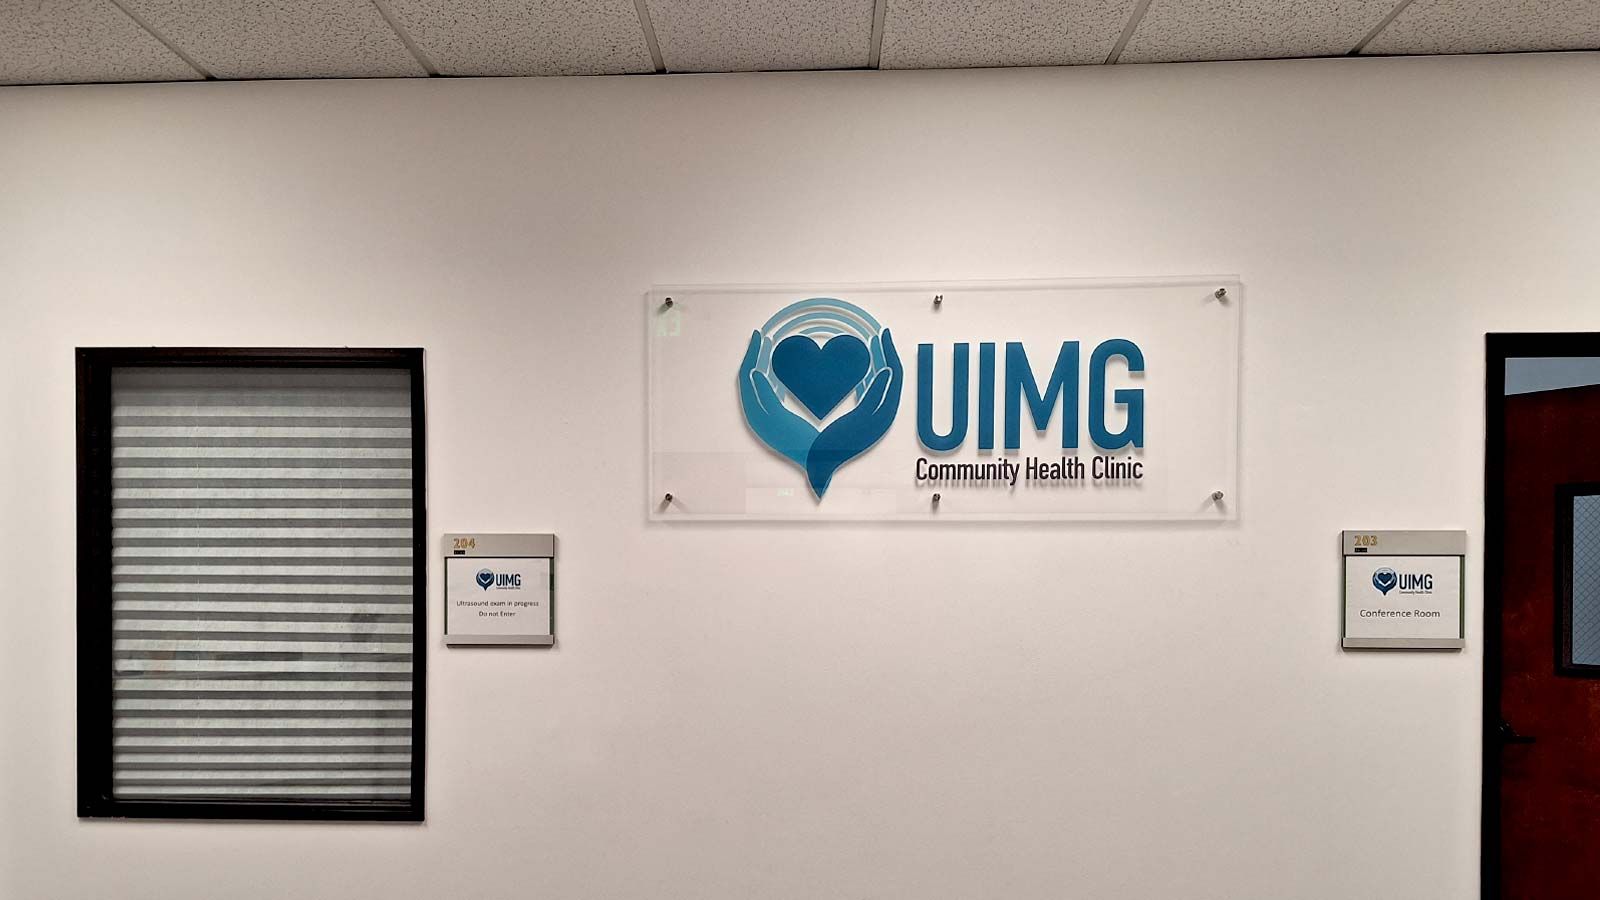 UIMG Community Health Clinic acrylic sign mounted on a wall